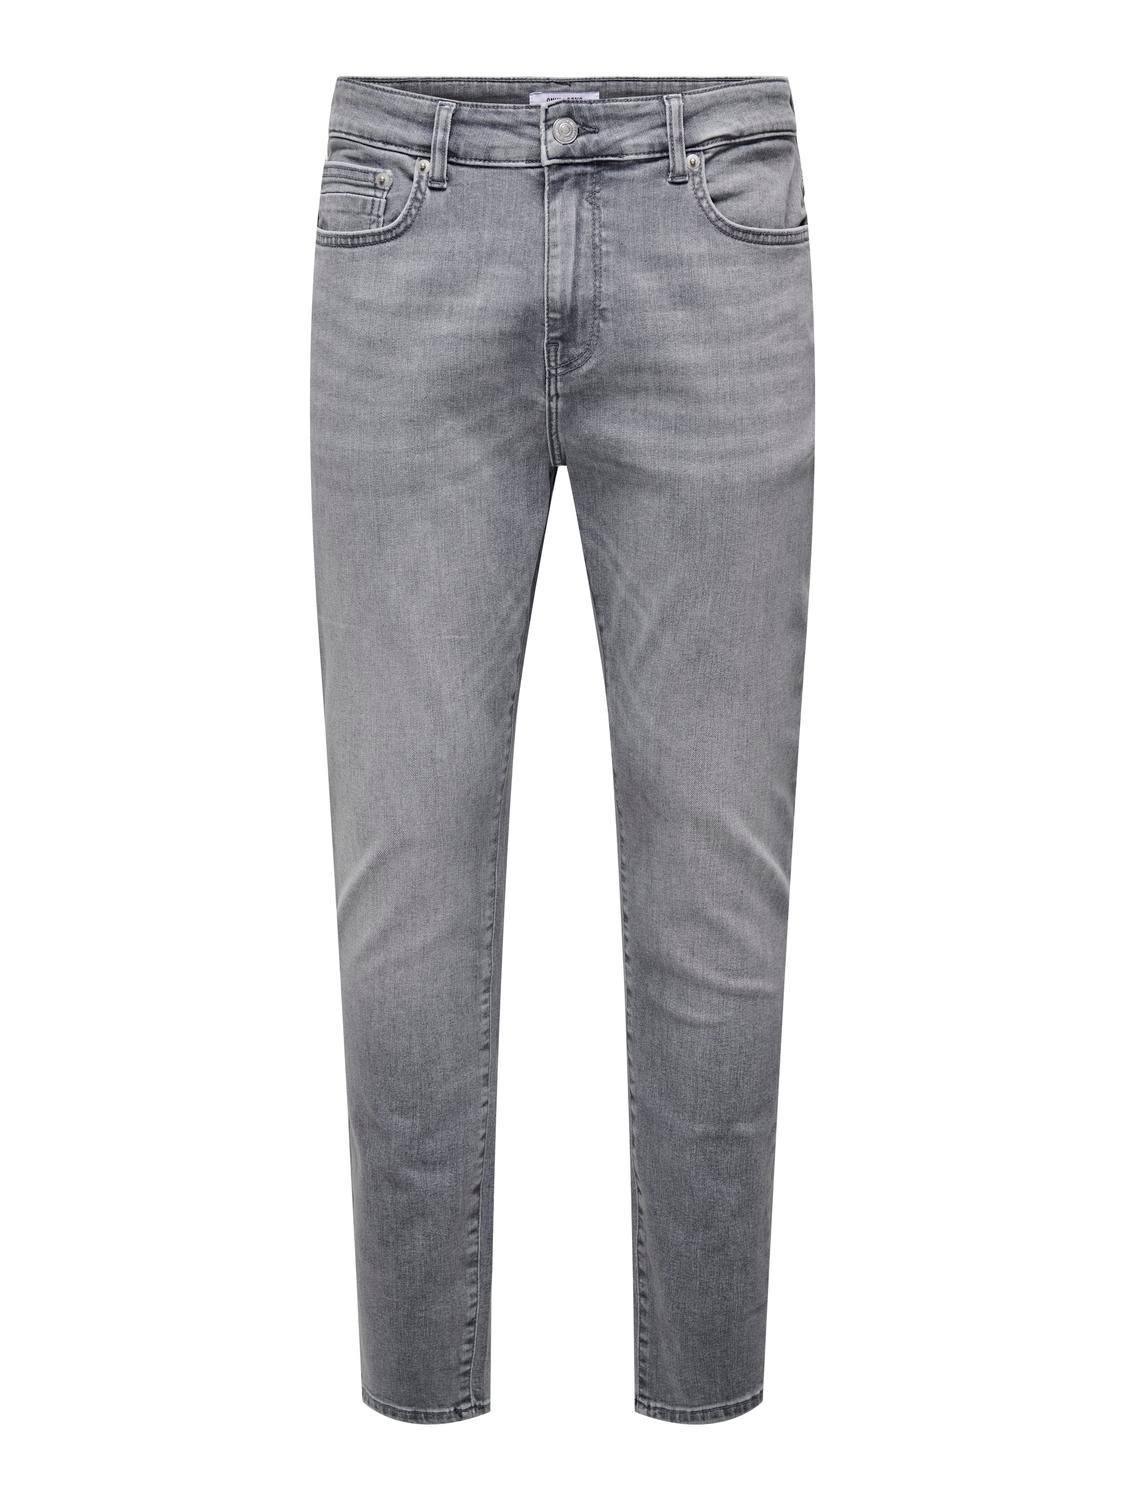 ONLY & SONS Tapered Fit Mid waist Jeans -Grey Denim - 22027844